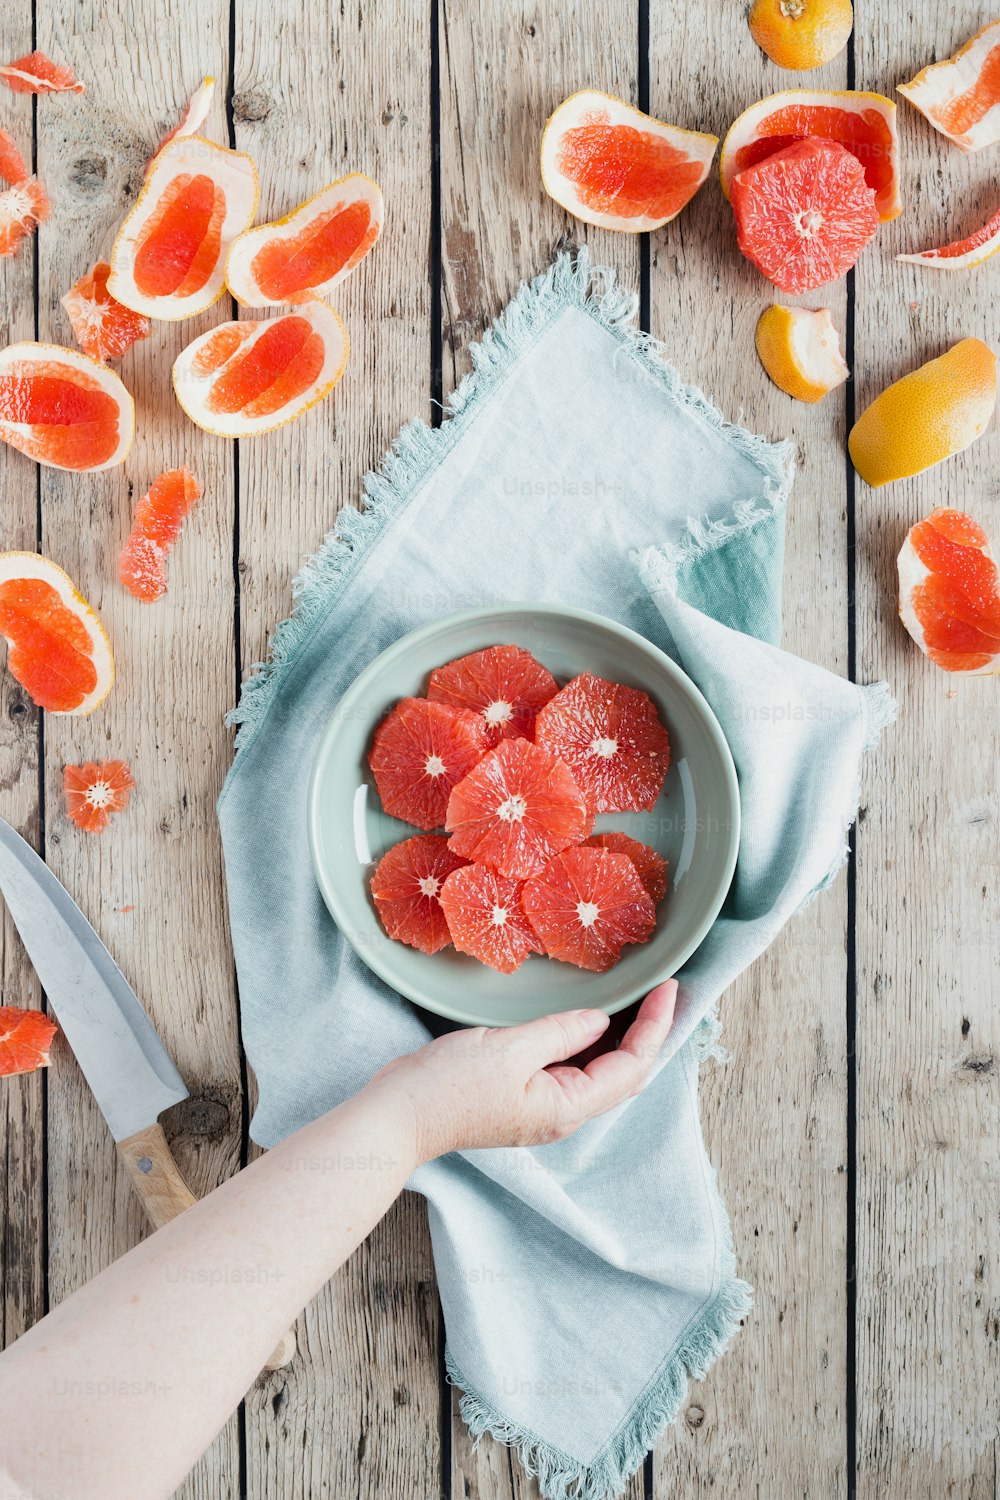 a person holding a plate of sliced grapefruits